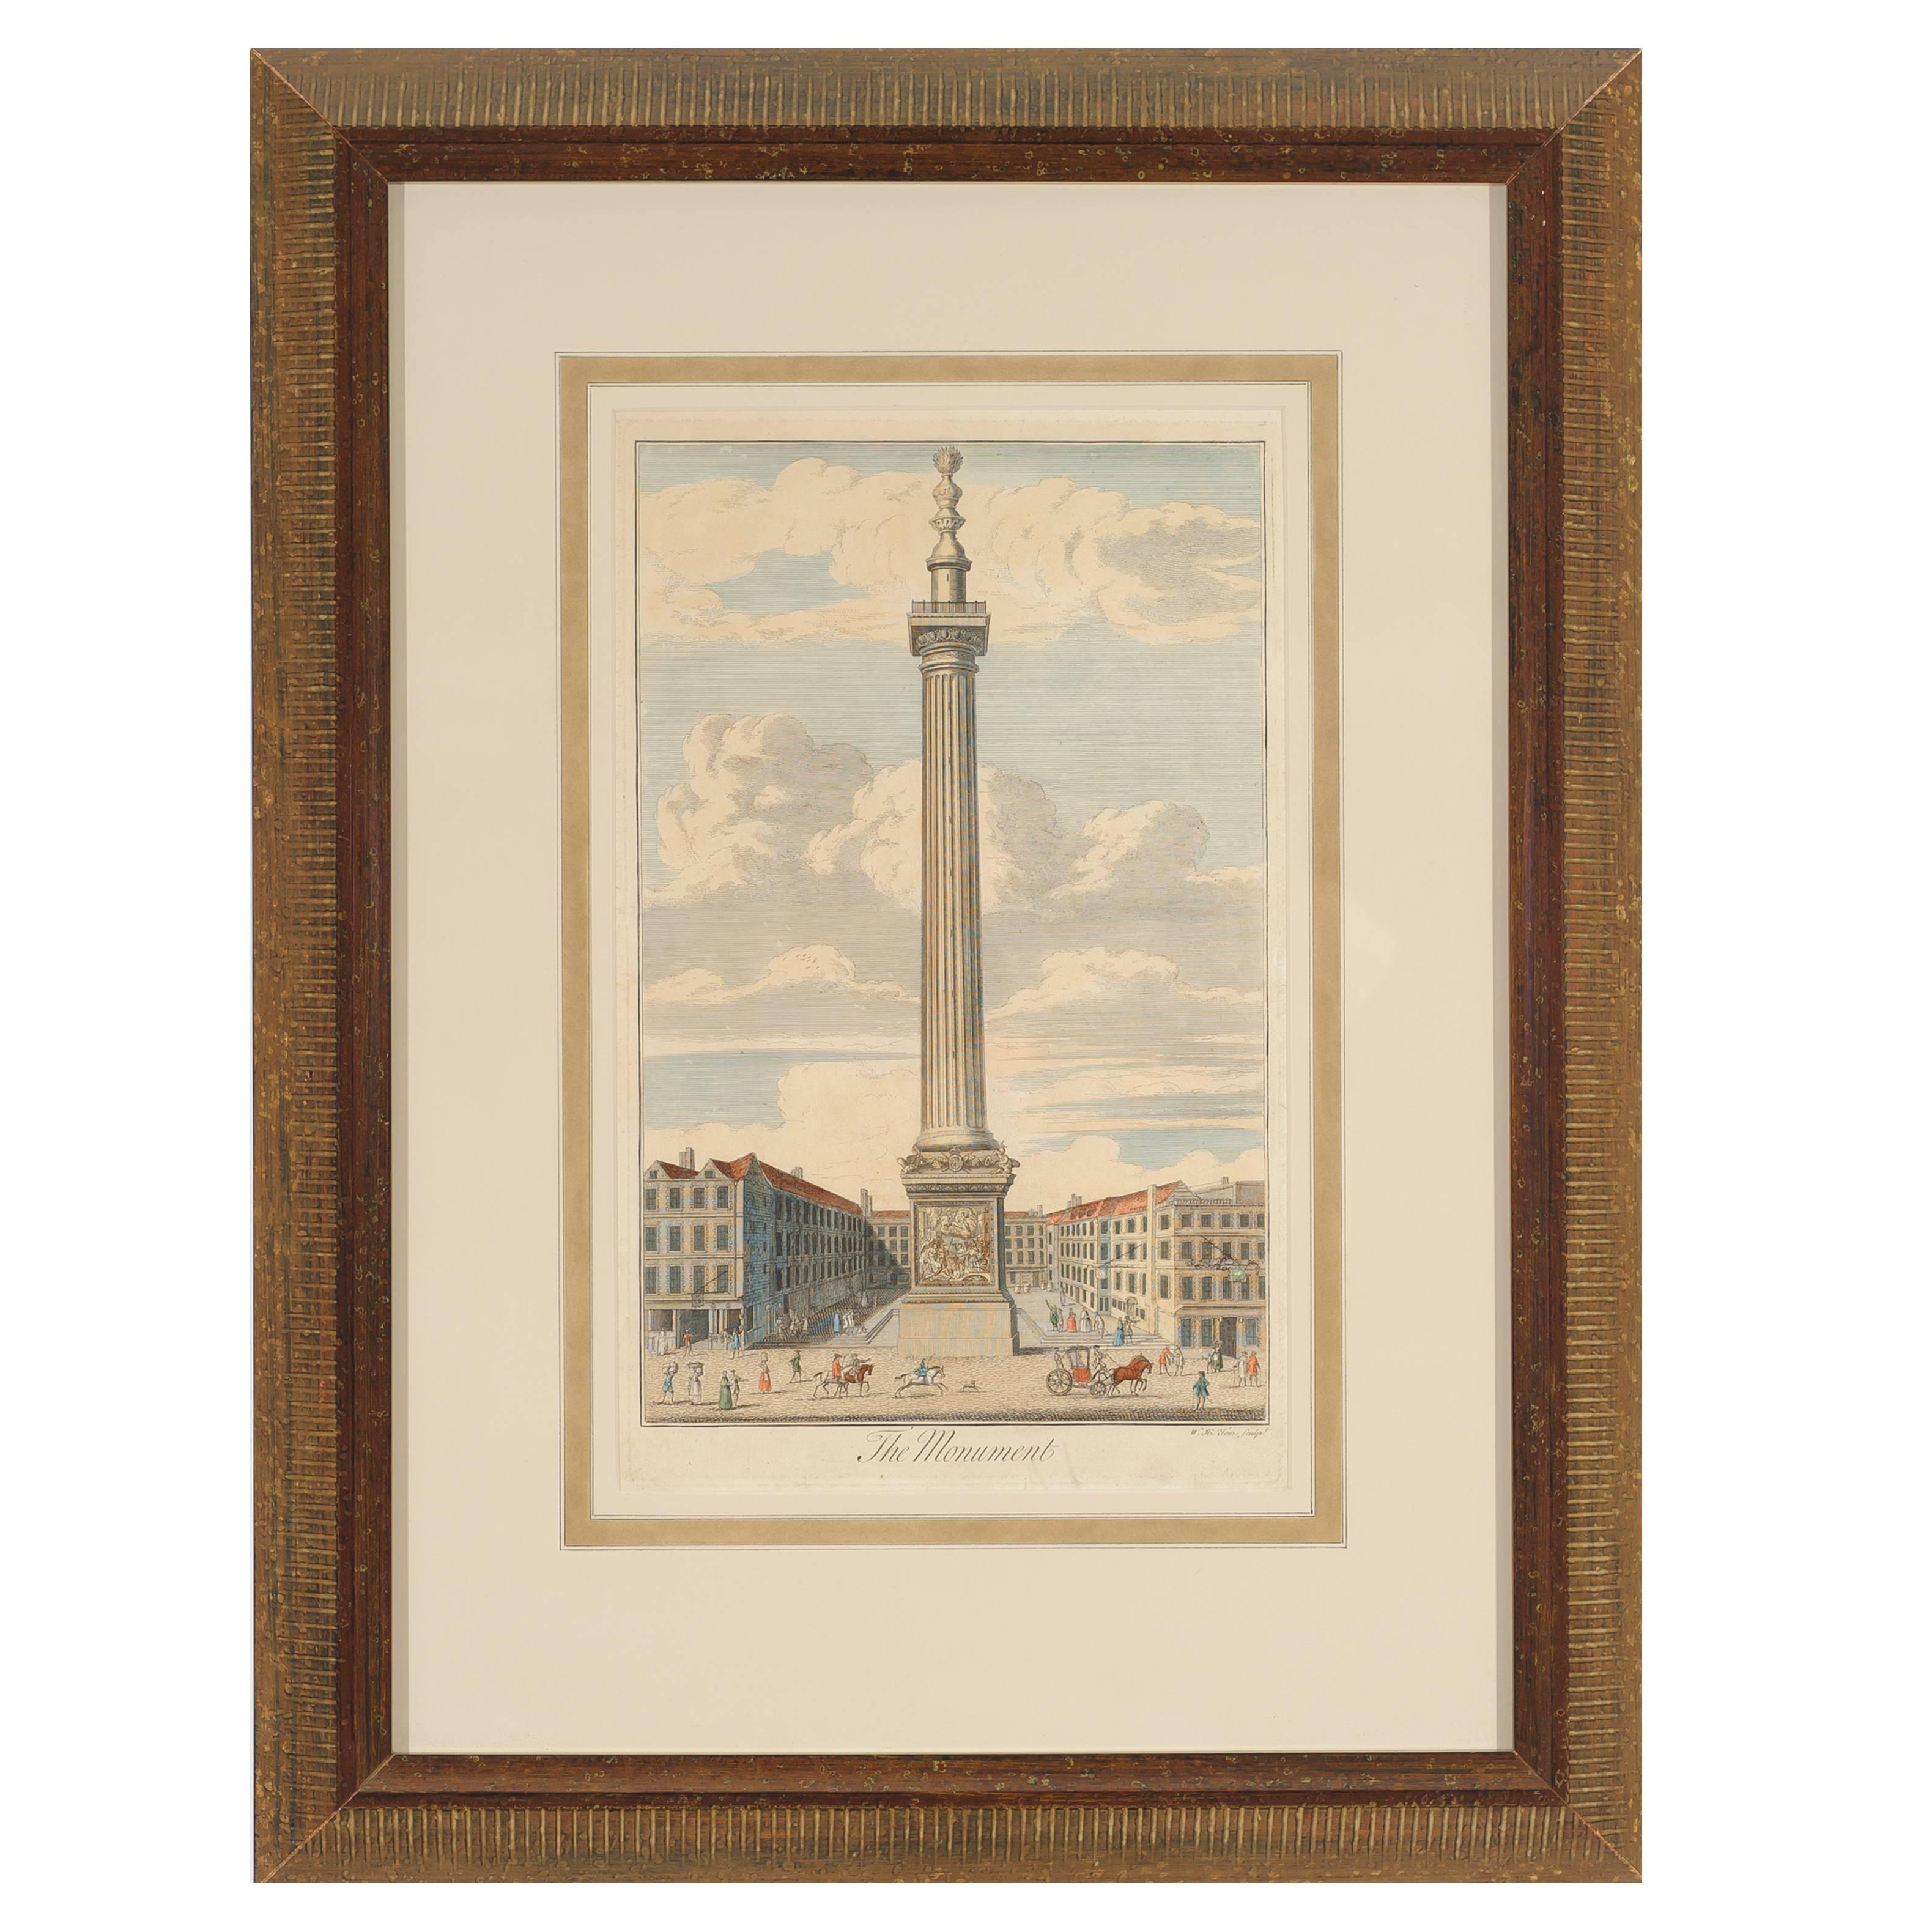 French Engraving "The Monument" For Sale